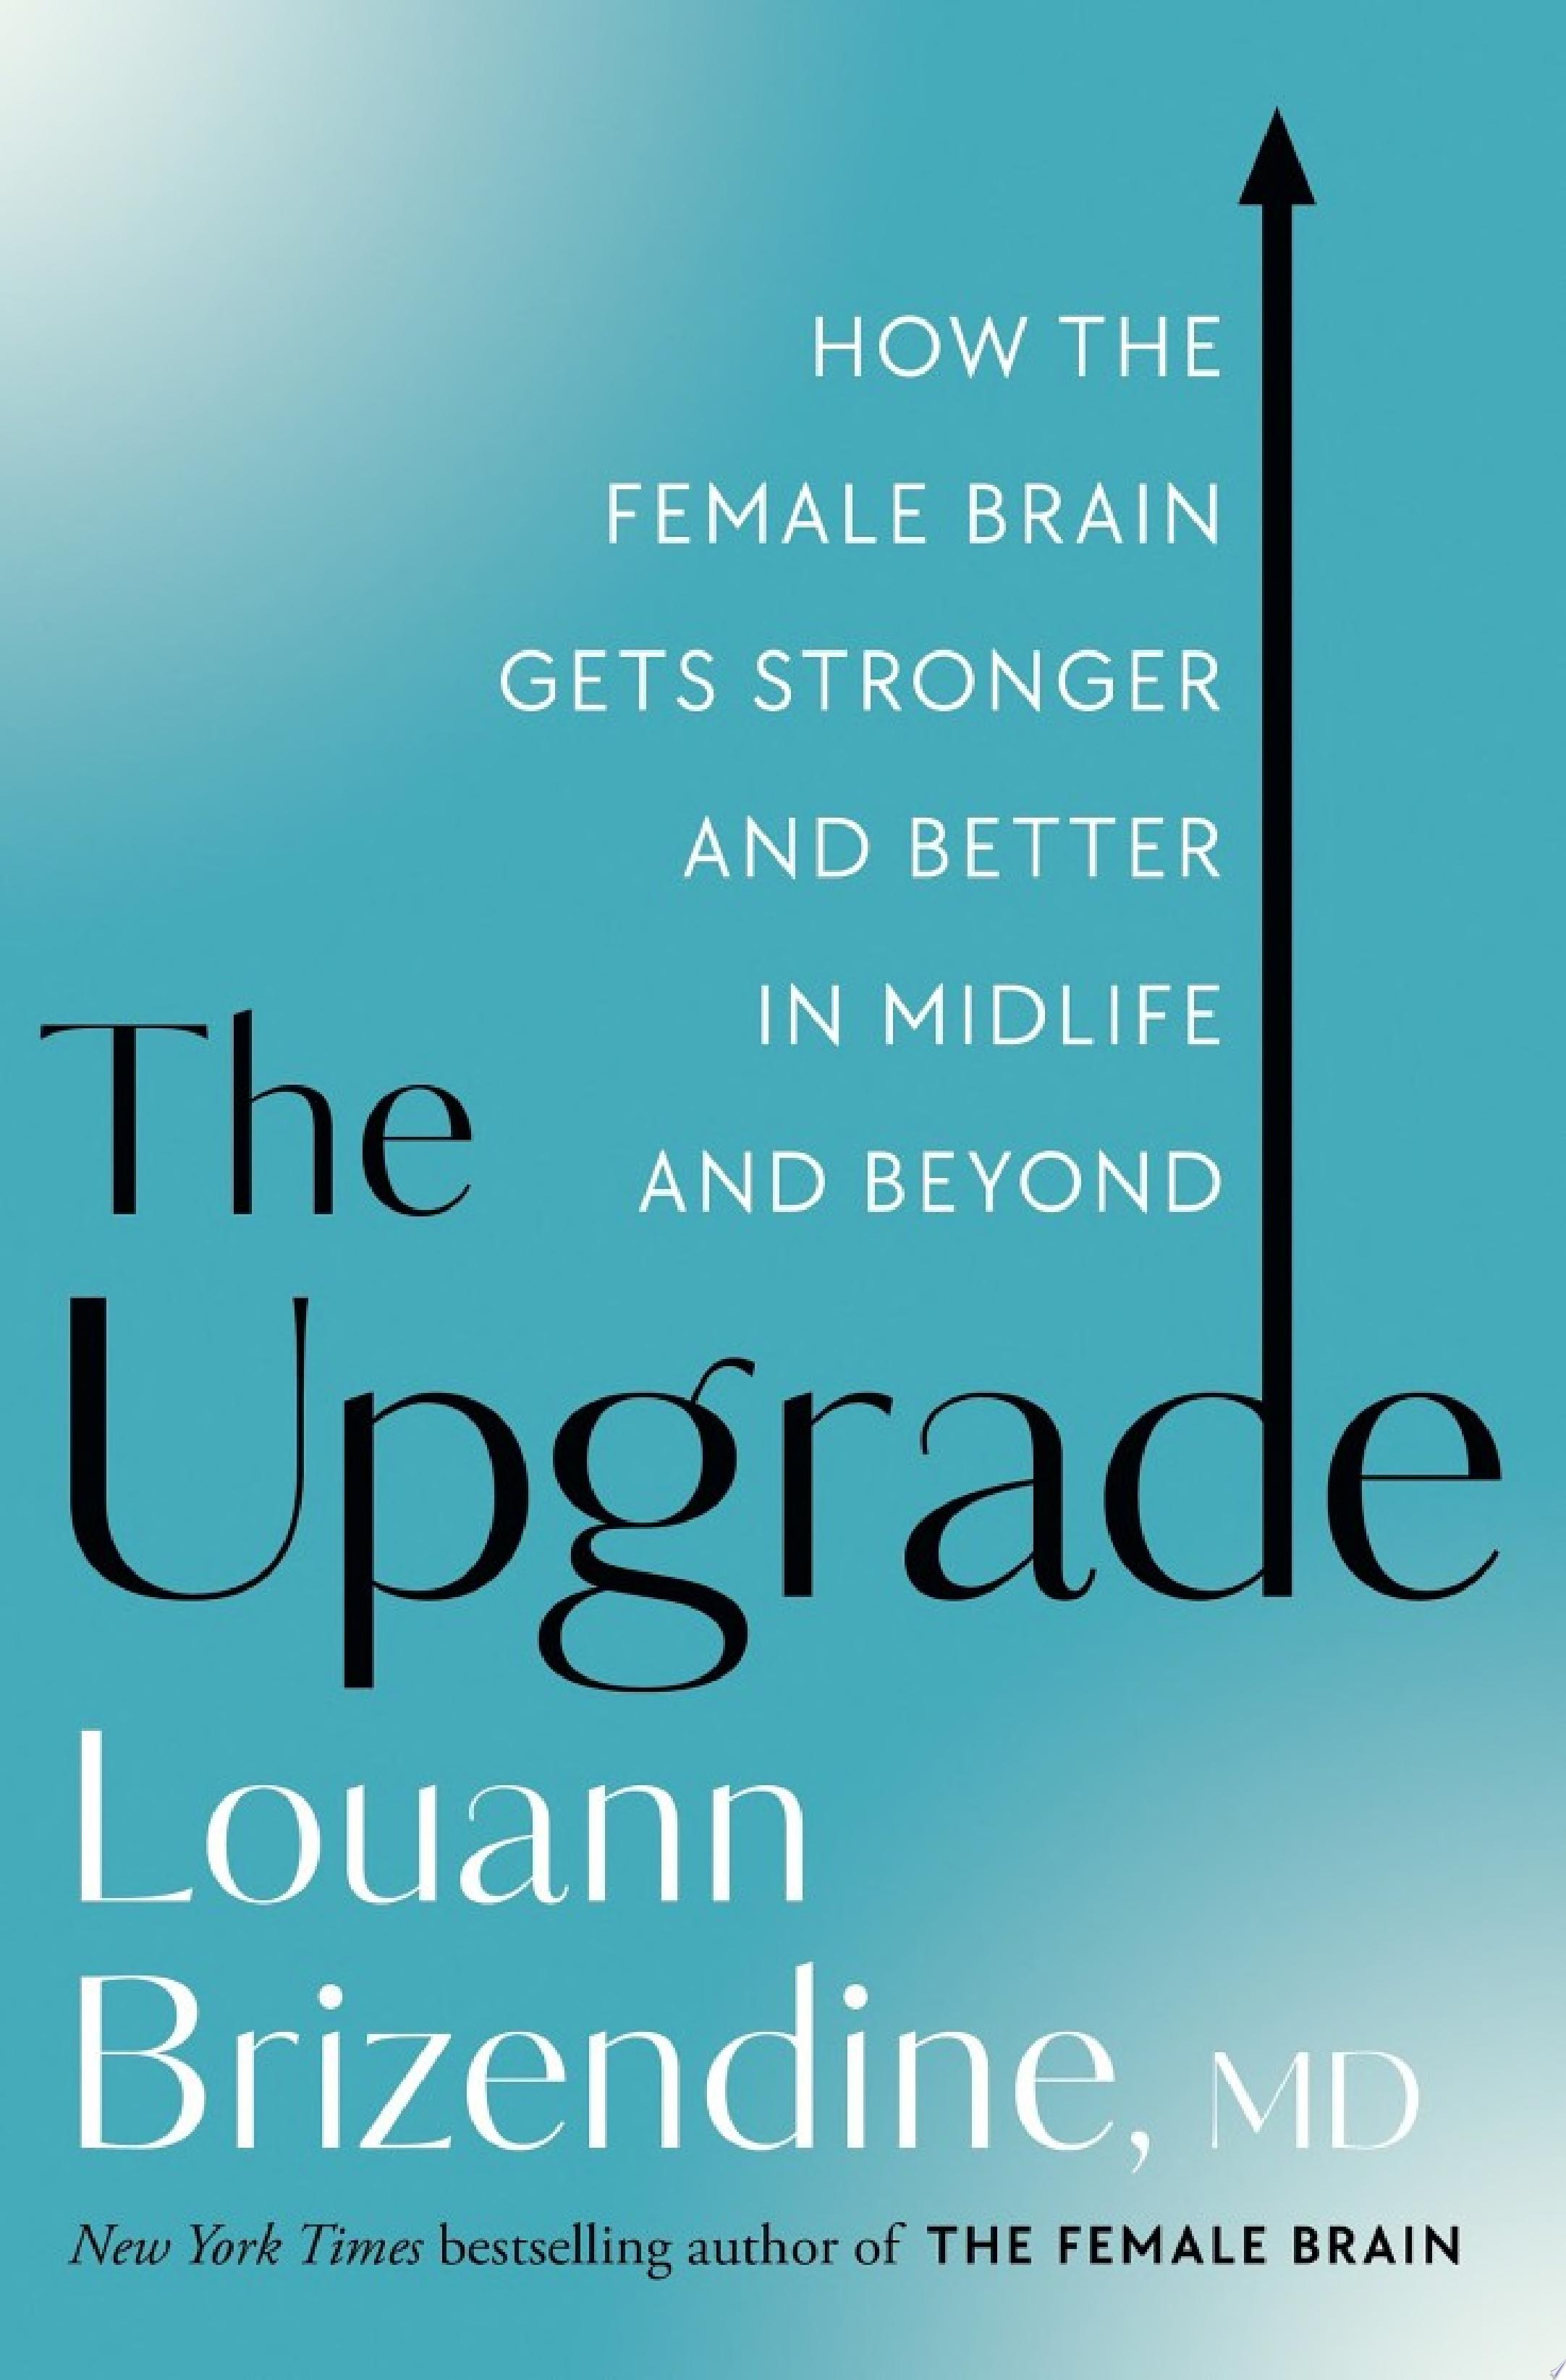 Image for "The Upgrade"